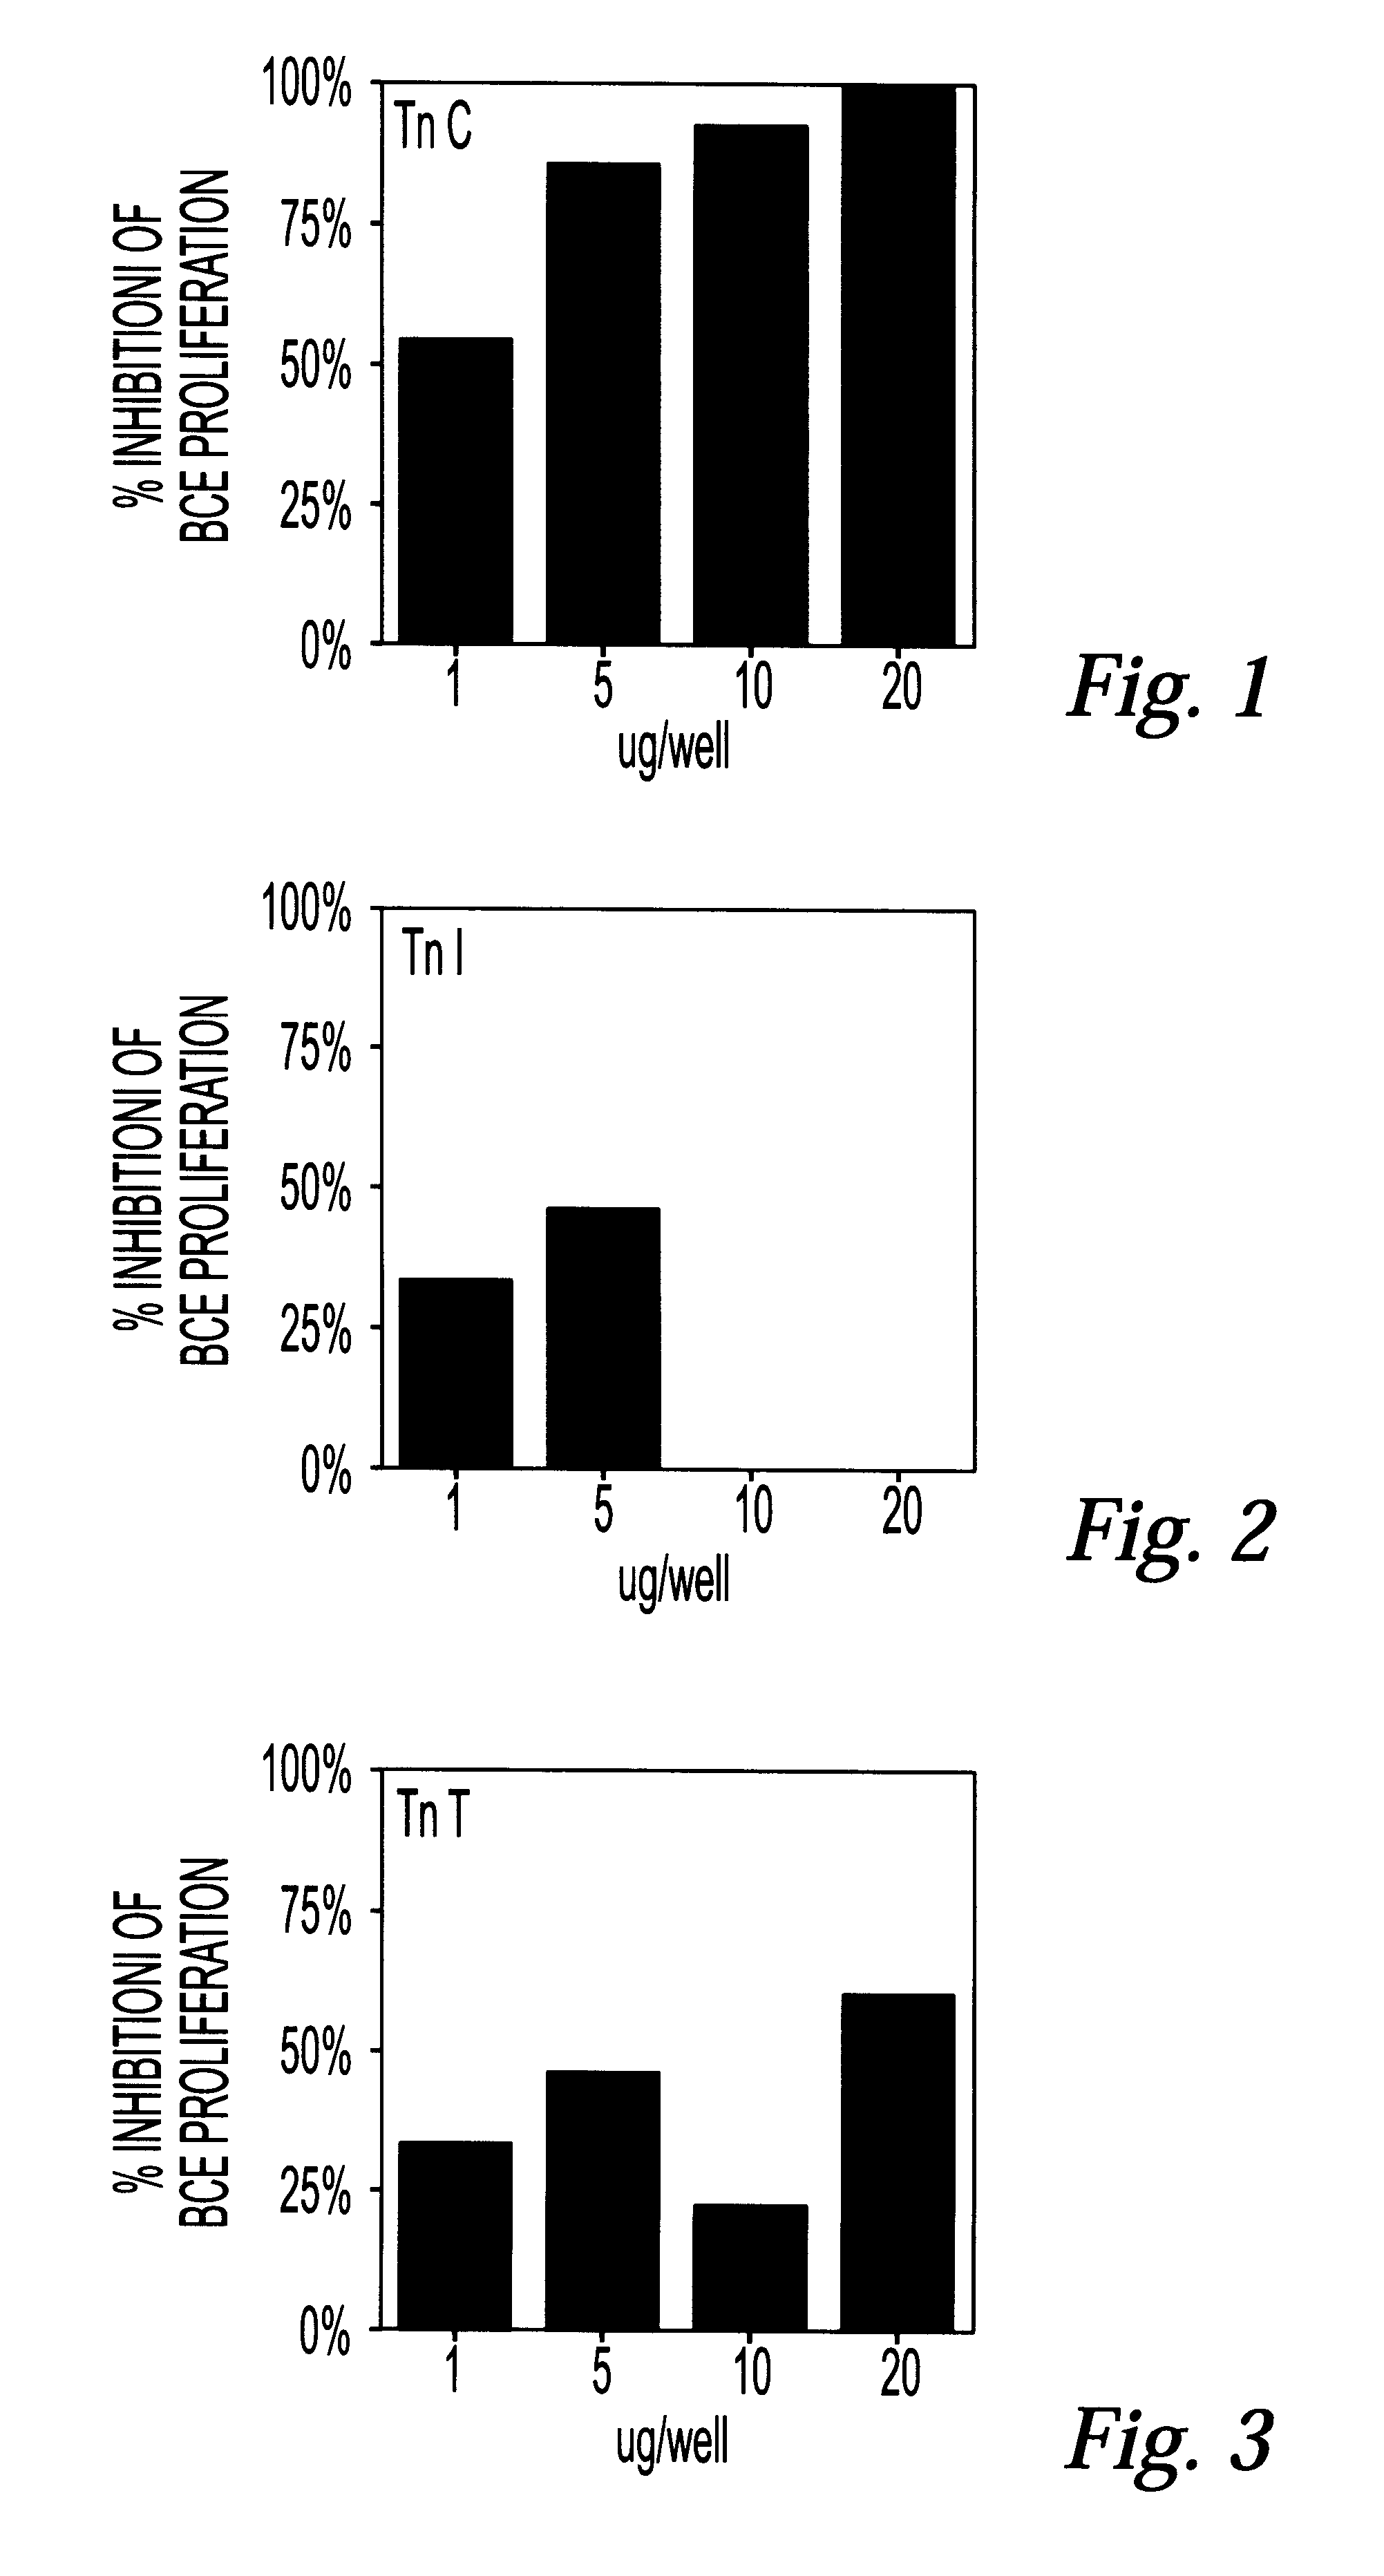 Pharmaceutical compositions comprising troponin subunits, fragments and homologs thereof and methods of their use to inhibit angiogenesis